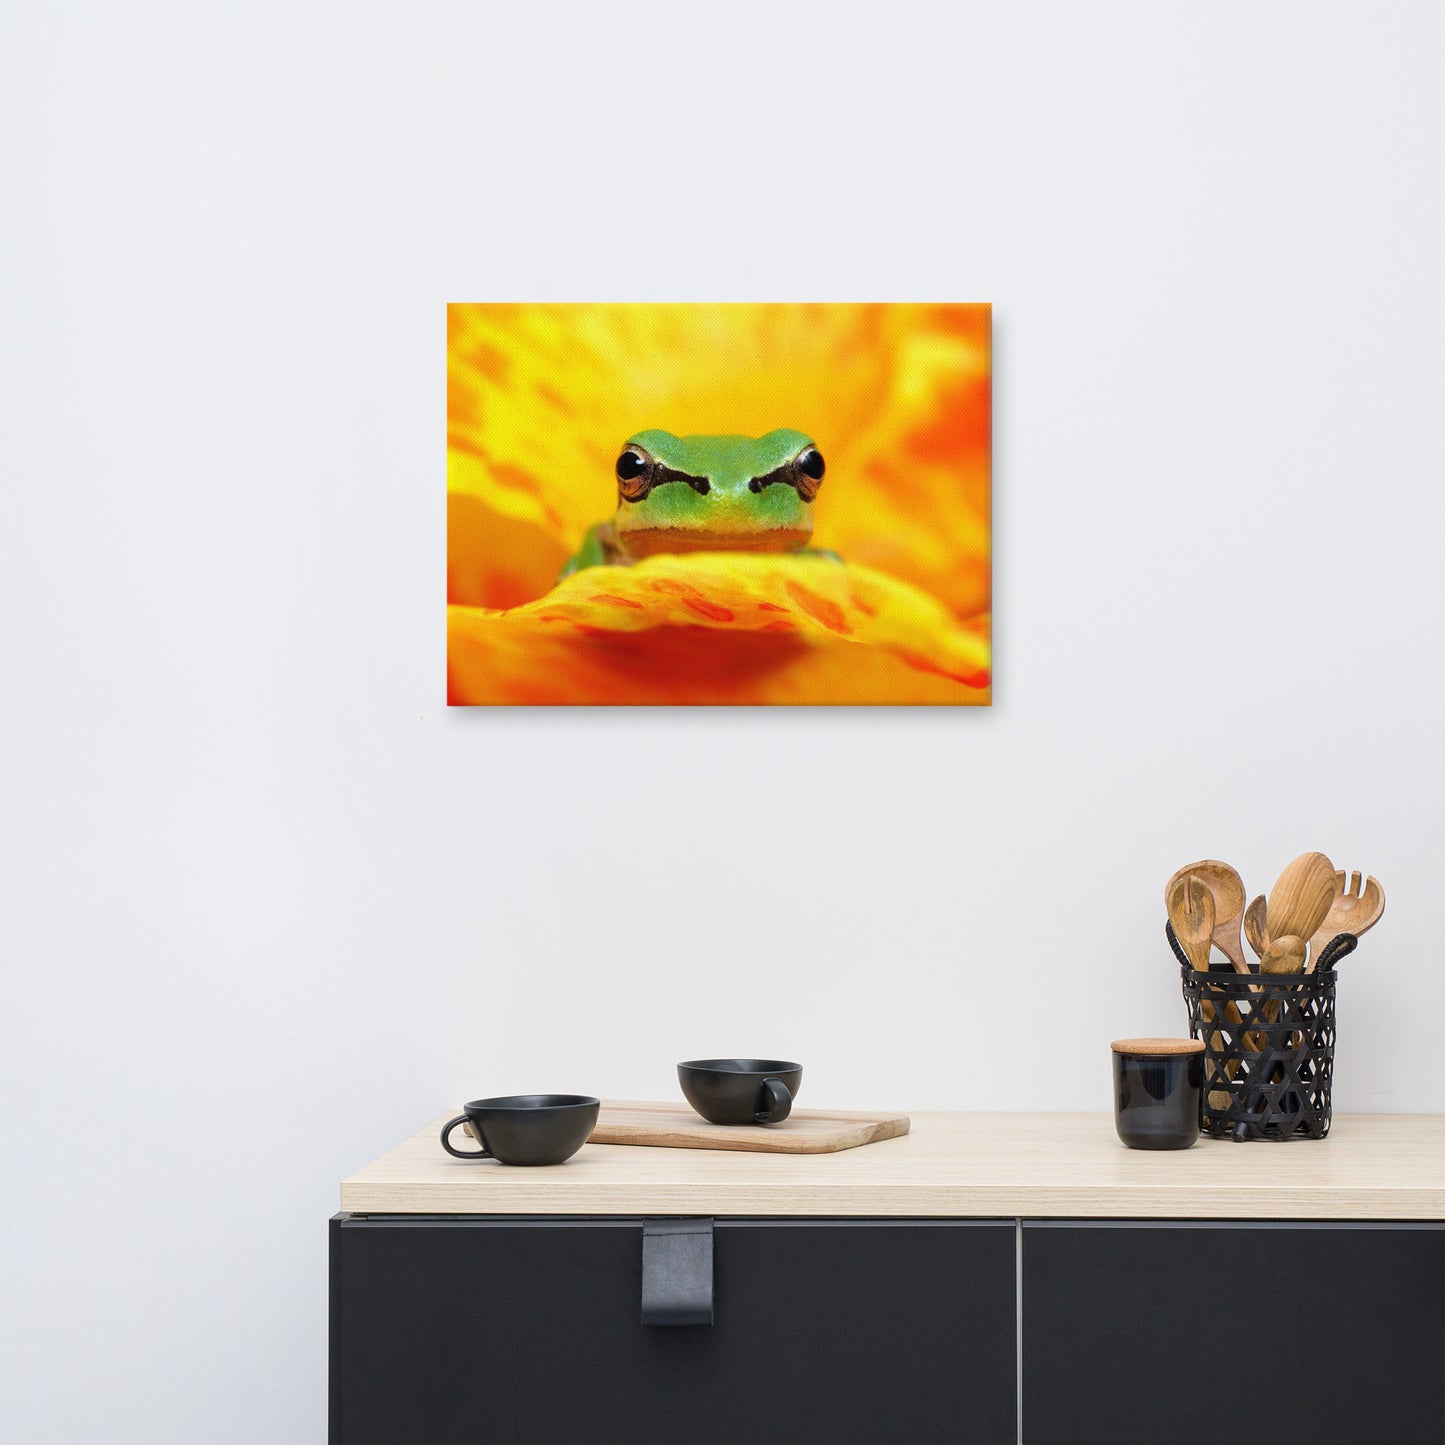 Hyla Green Frog on Yellow and Orange Flower Petals Wildlife Nature Photo Canvas Wall Art Print